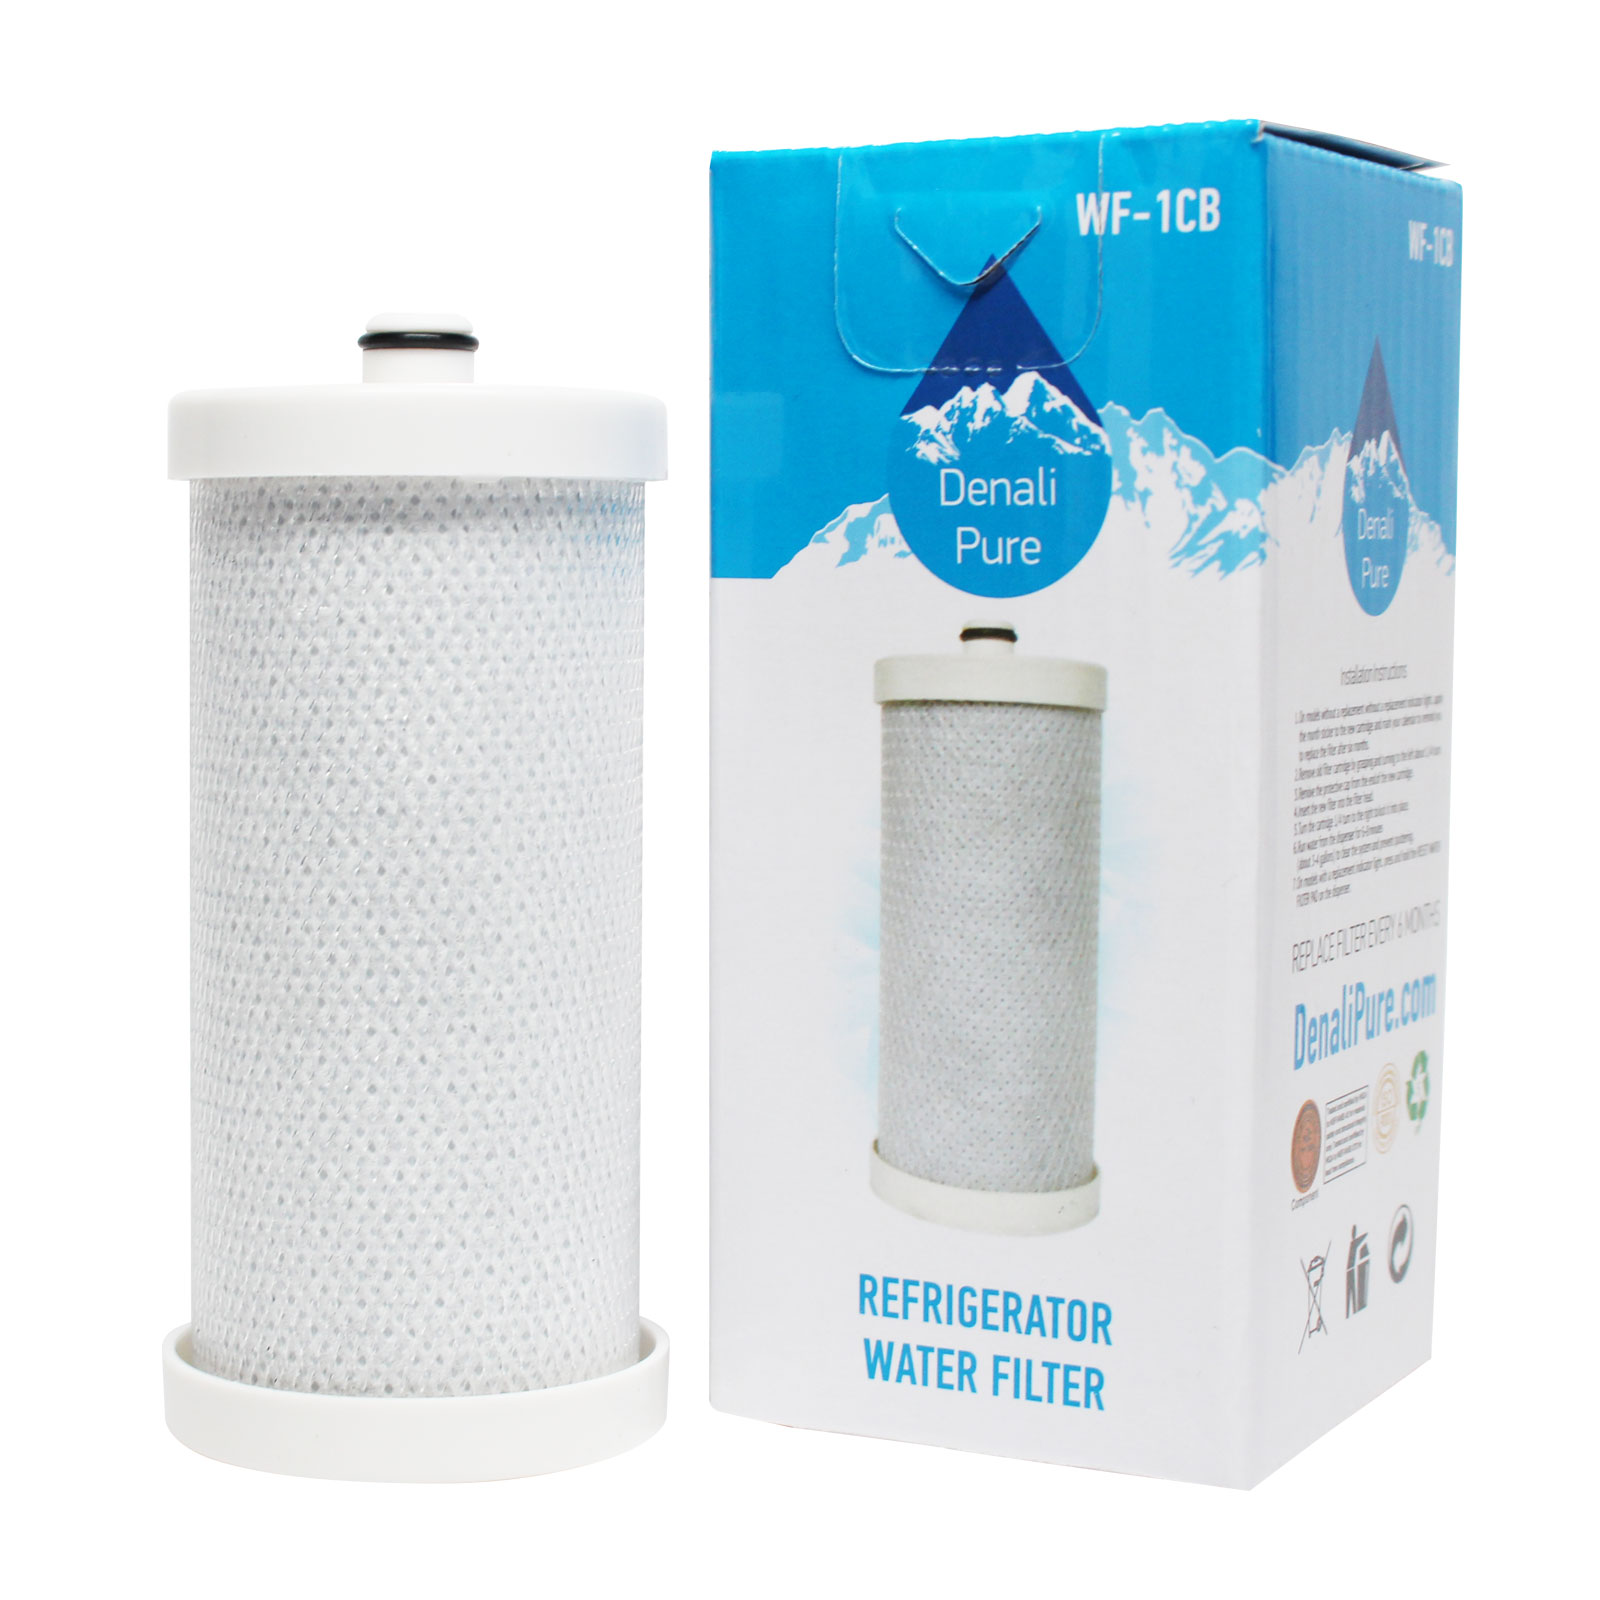 Compatible Frigidaire FRS26R4CWR Refrigerator Water Filter - Compatible Frigidaire WF1CB, WFCB Fridge Water Filter Cartridge - image 1 of 4